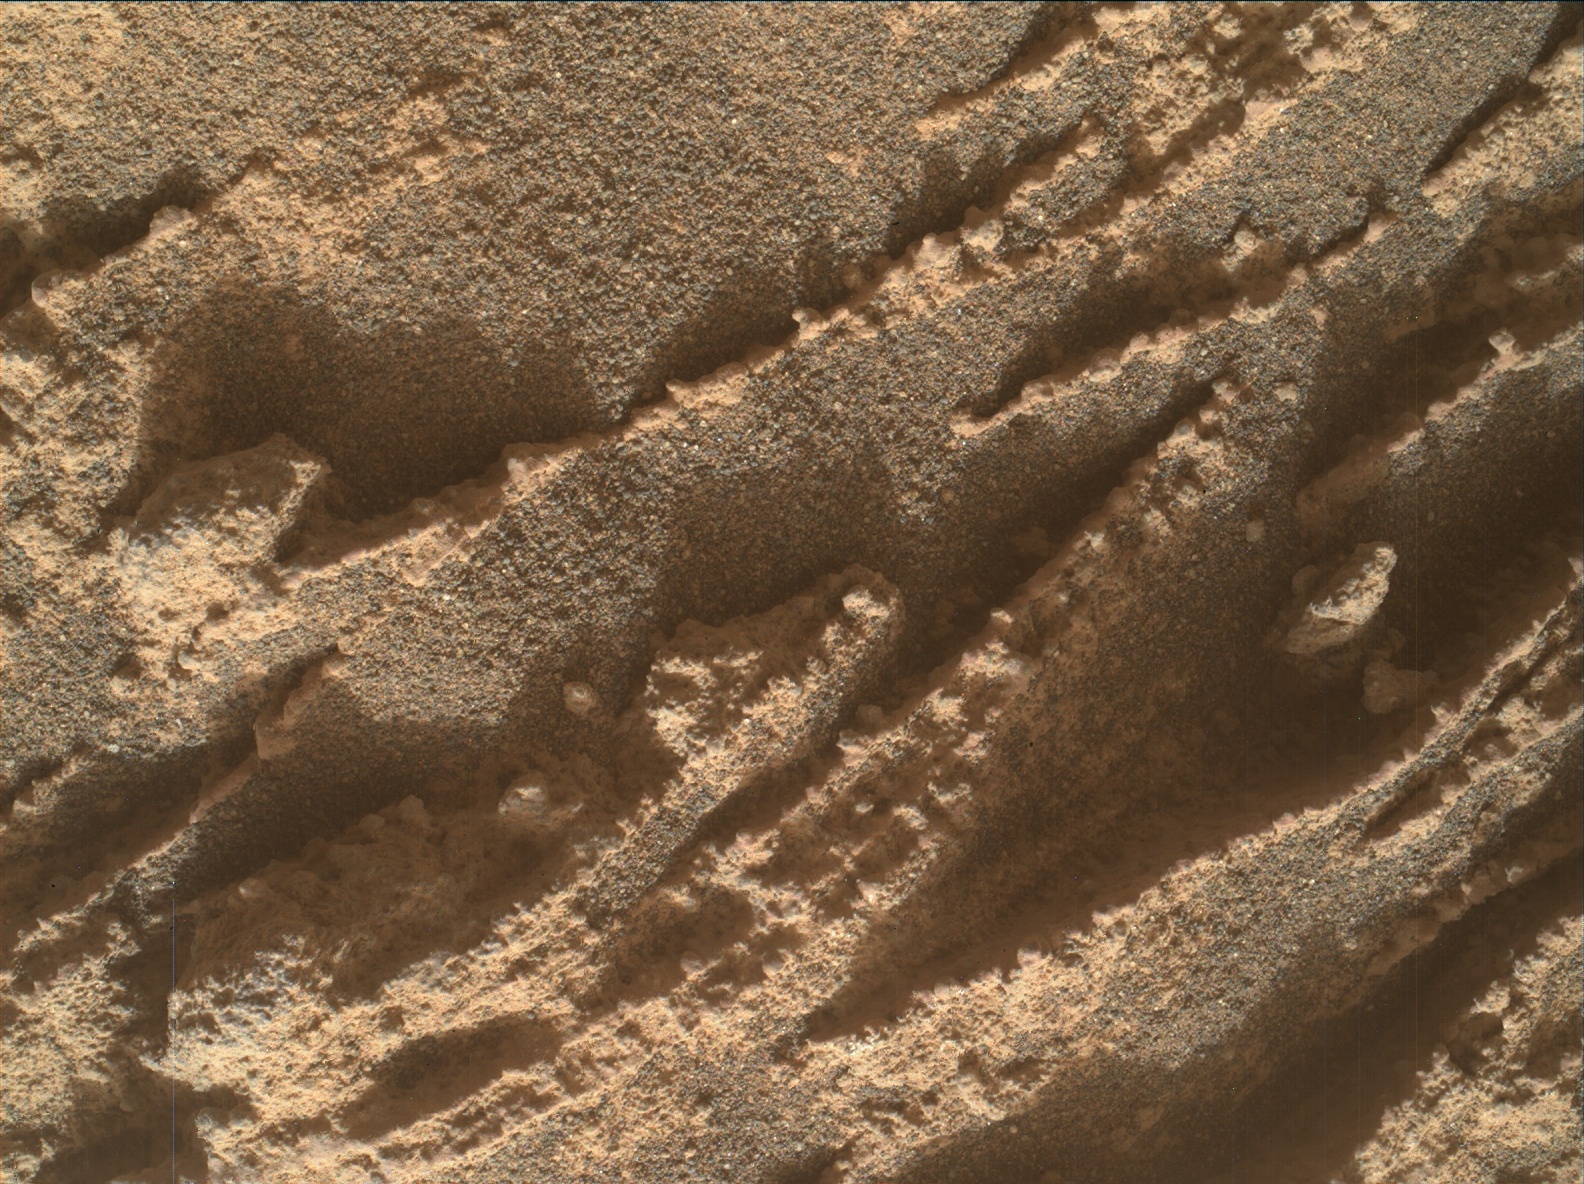 Nasa's Mars rover Curiosity acquired this image using its Mars Hand Lens Imager (MAHLI) on Sol 3363